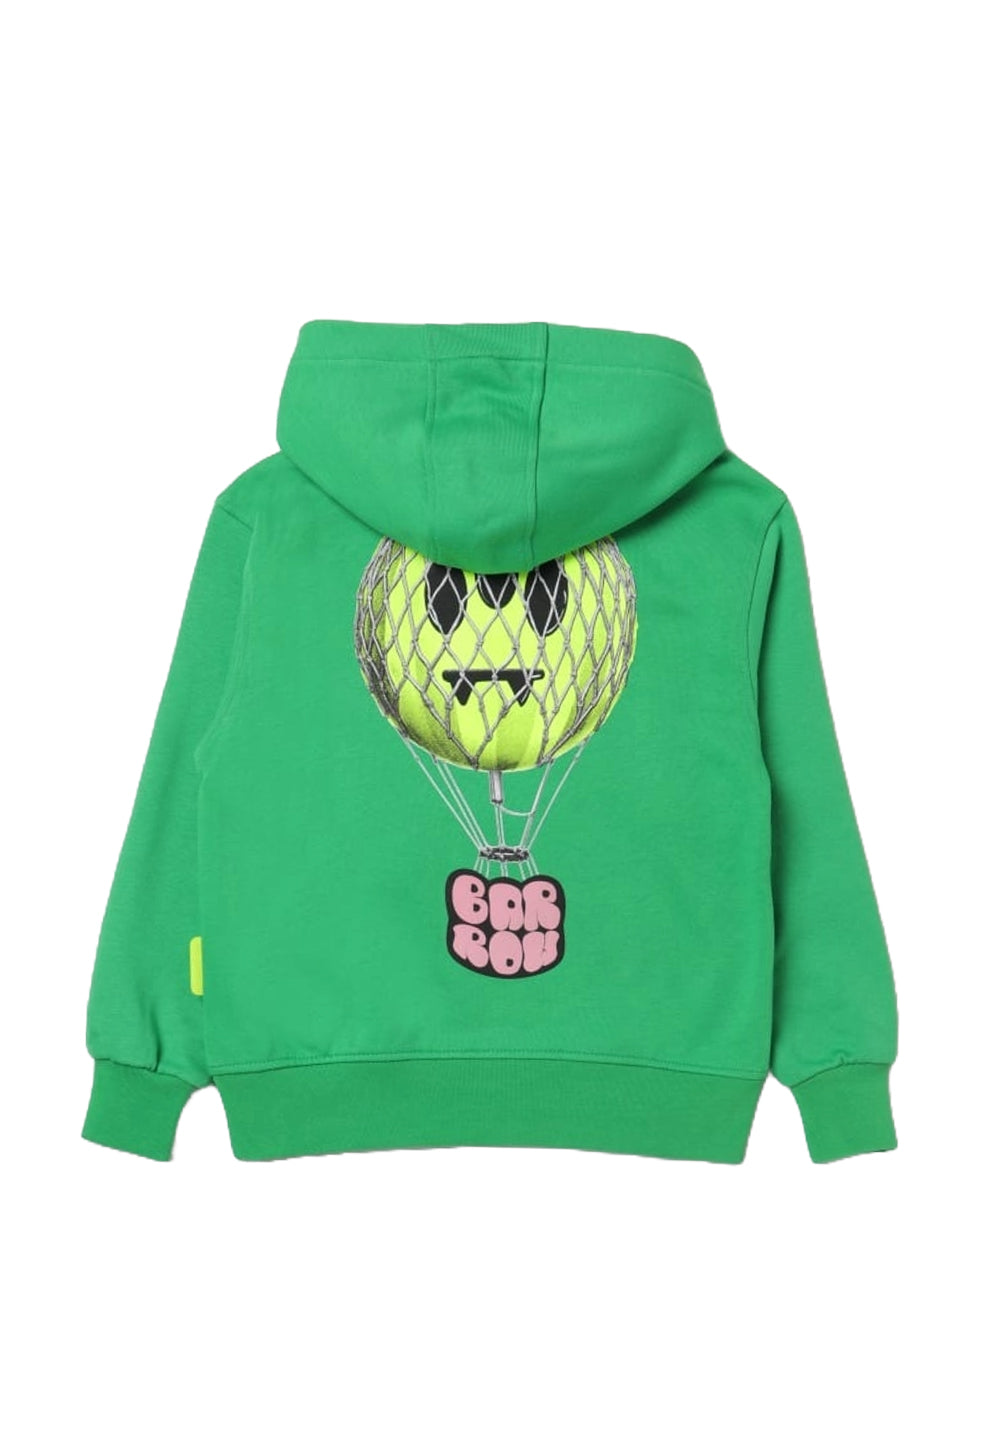 Green hoodie for boys